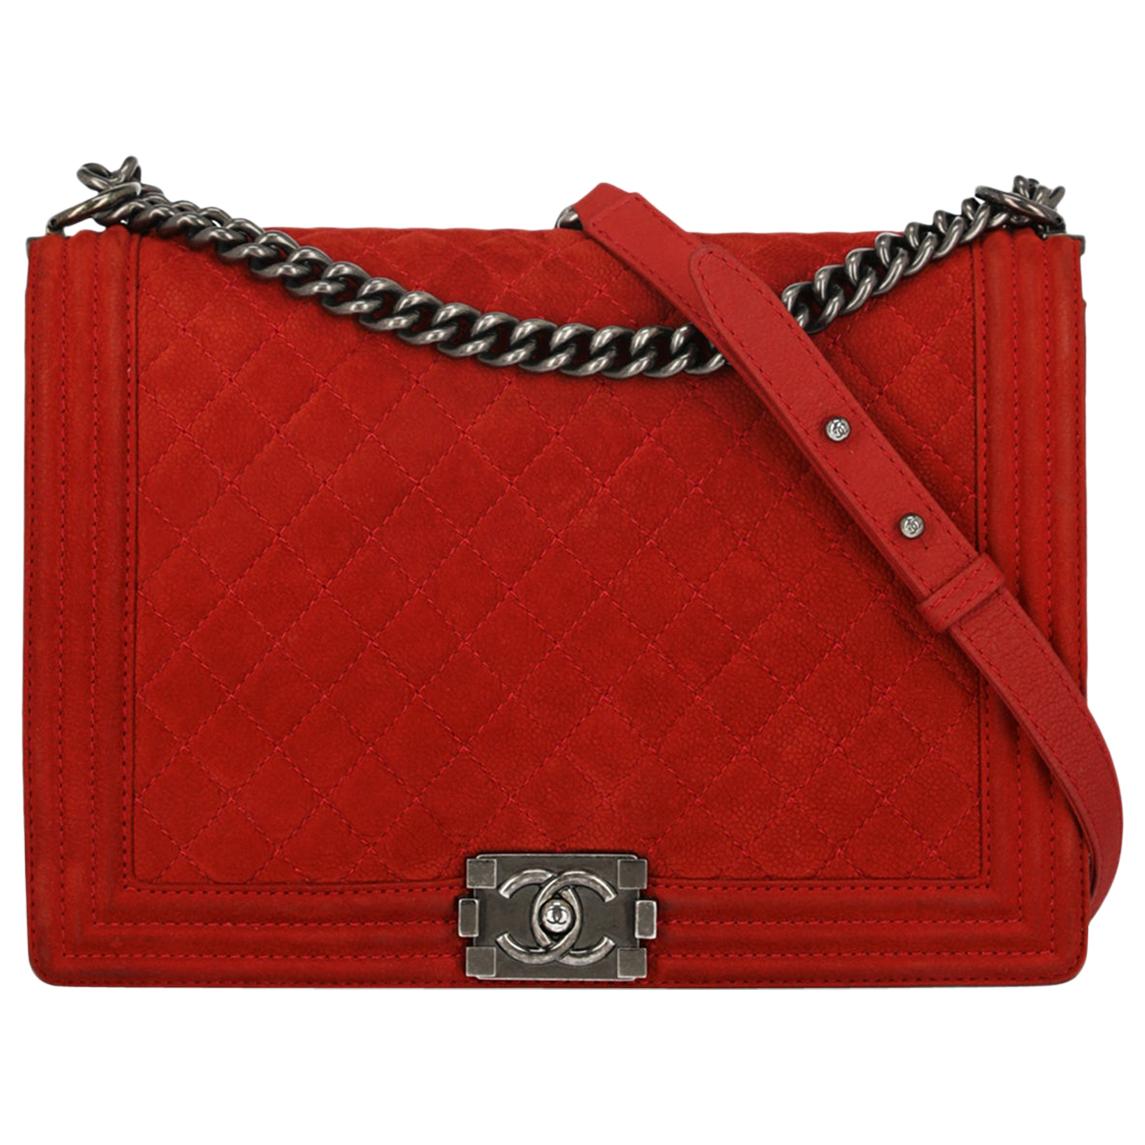 Chanel Woman Boy Red  For Sale